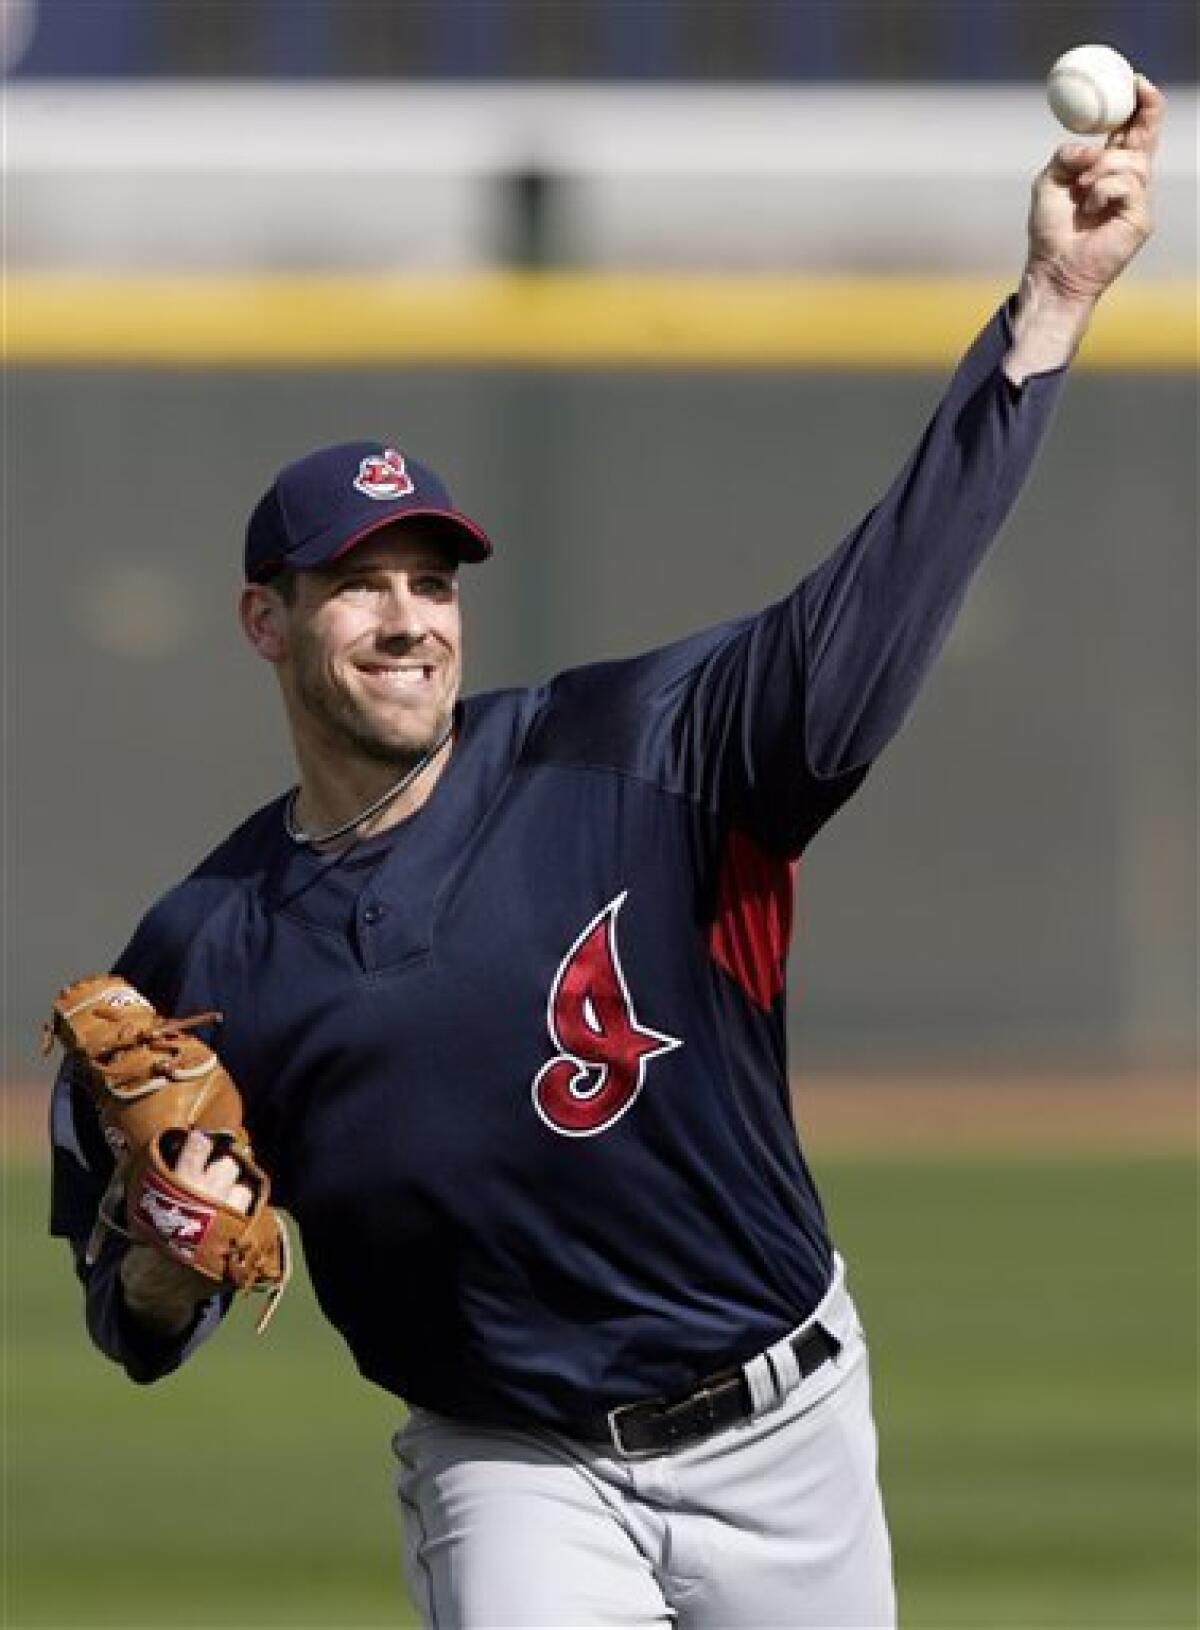 Indians' Cliff Lee set for Cy Young sequel - The San Diego Union